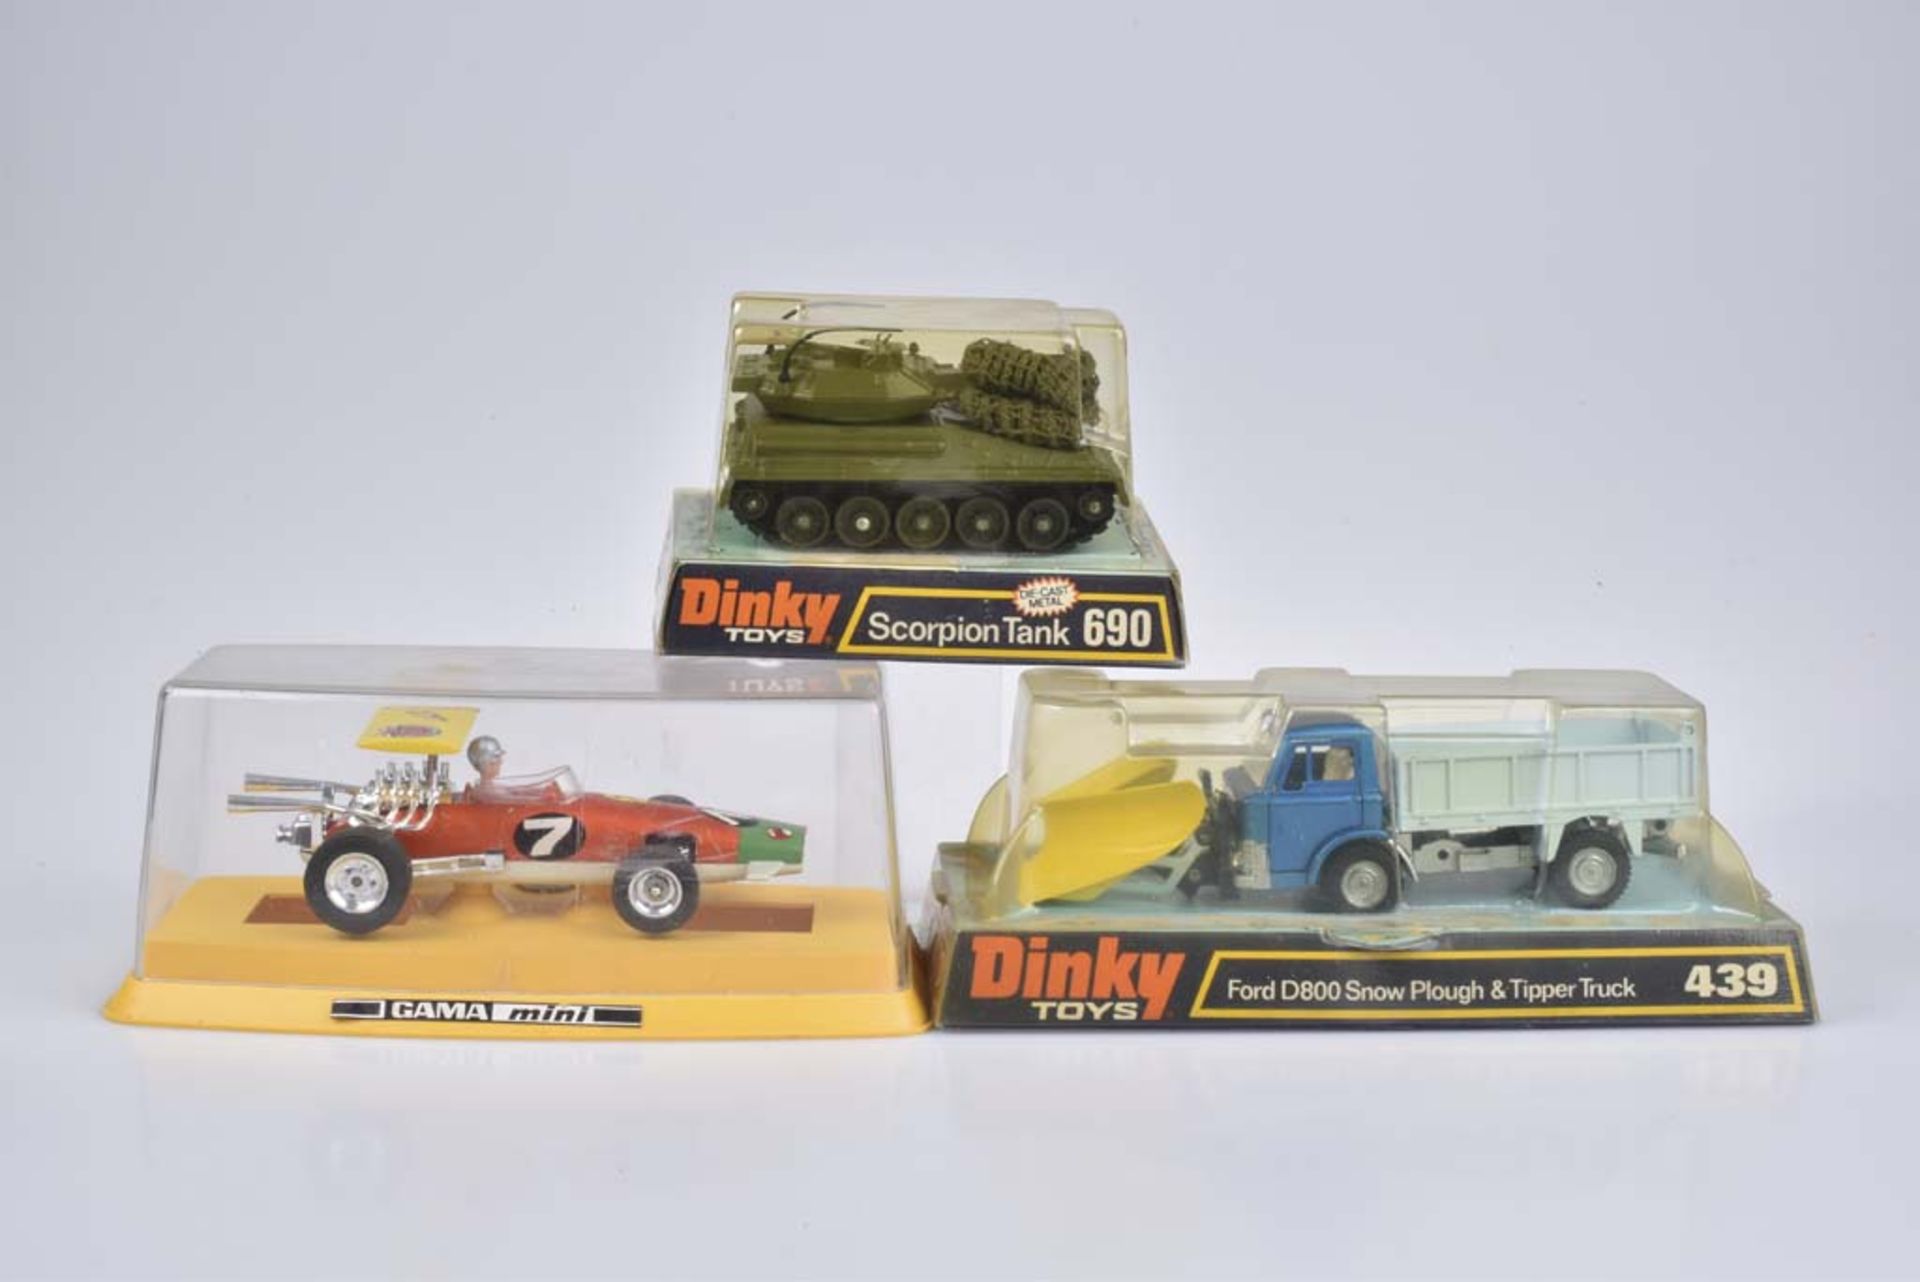 DINKY TOYS/ GAMA MINI 3 Modellfahrzeuge Made in Western Germany/ Made in England, Meta